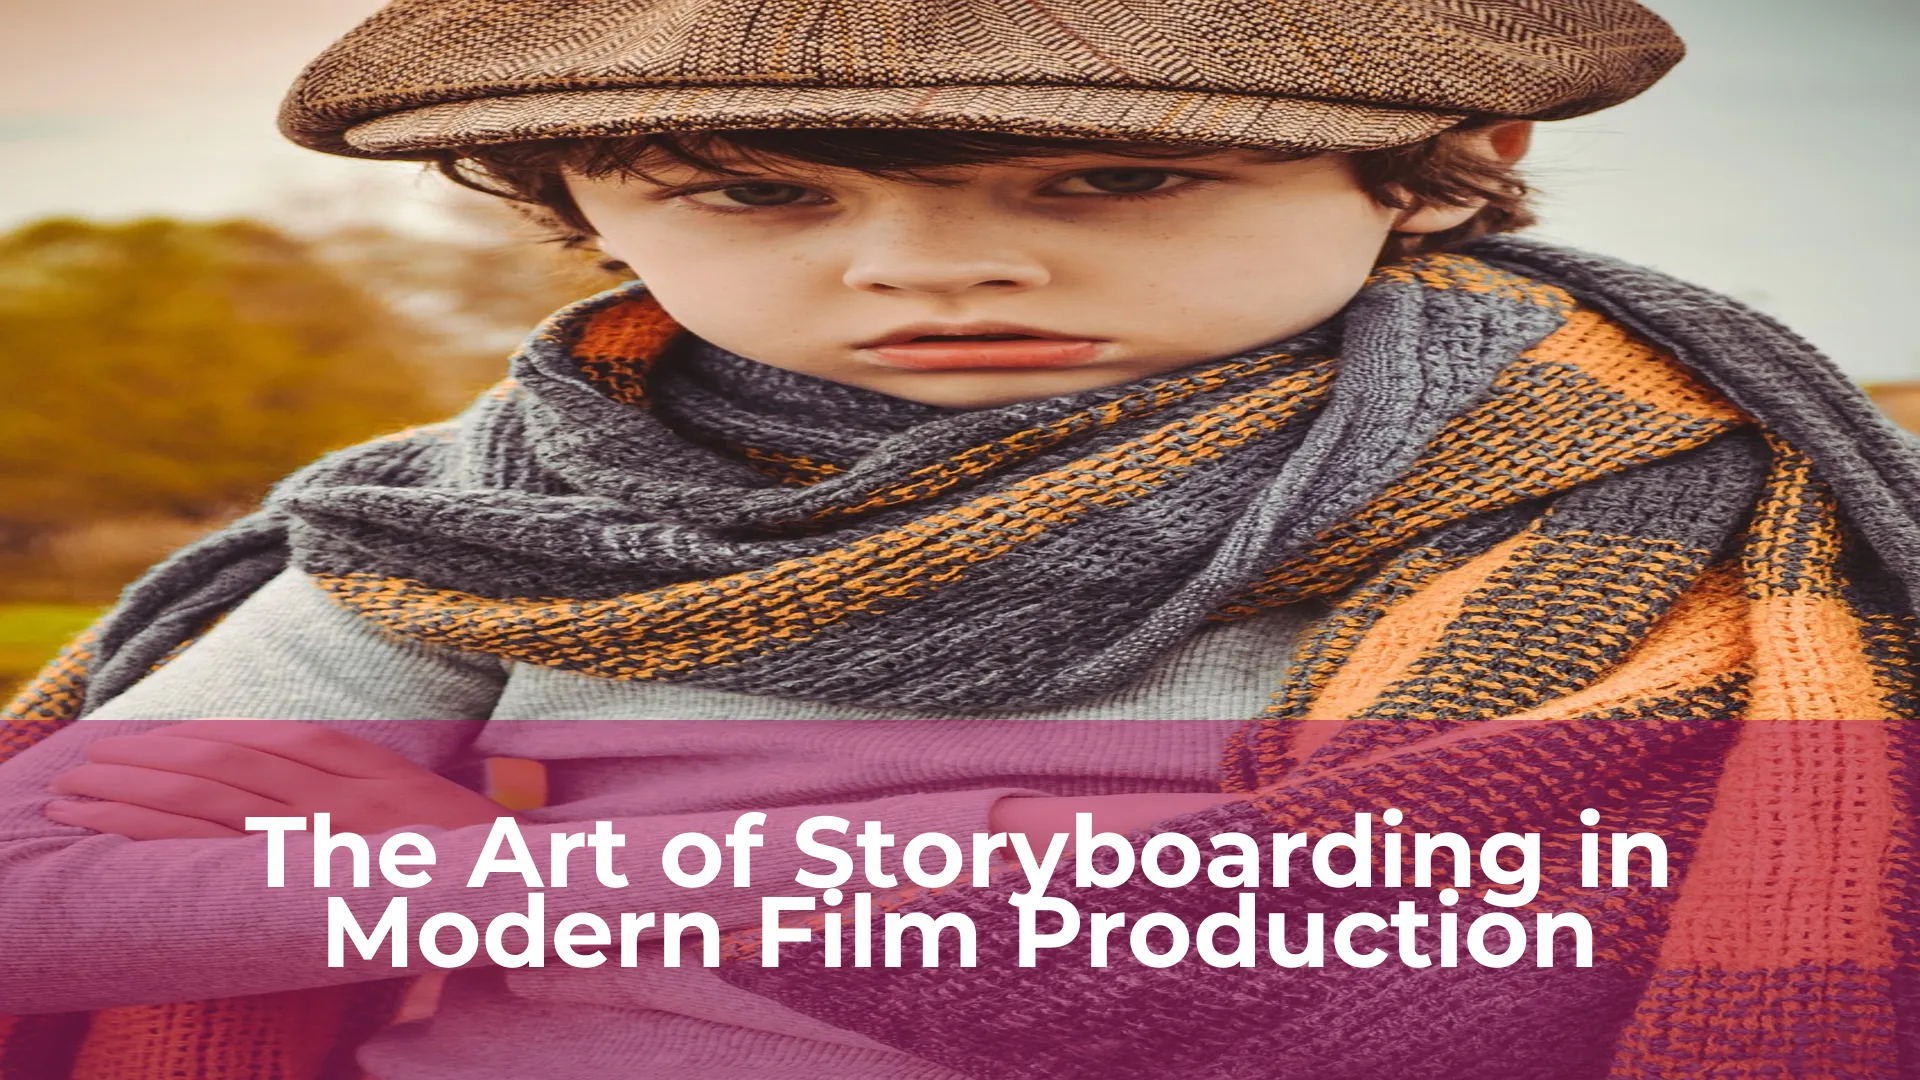 The art of storyboarding in modern film production